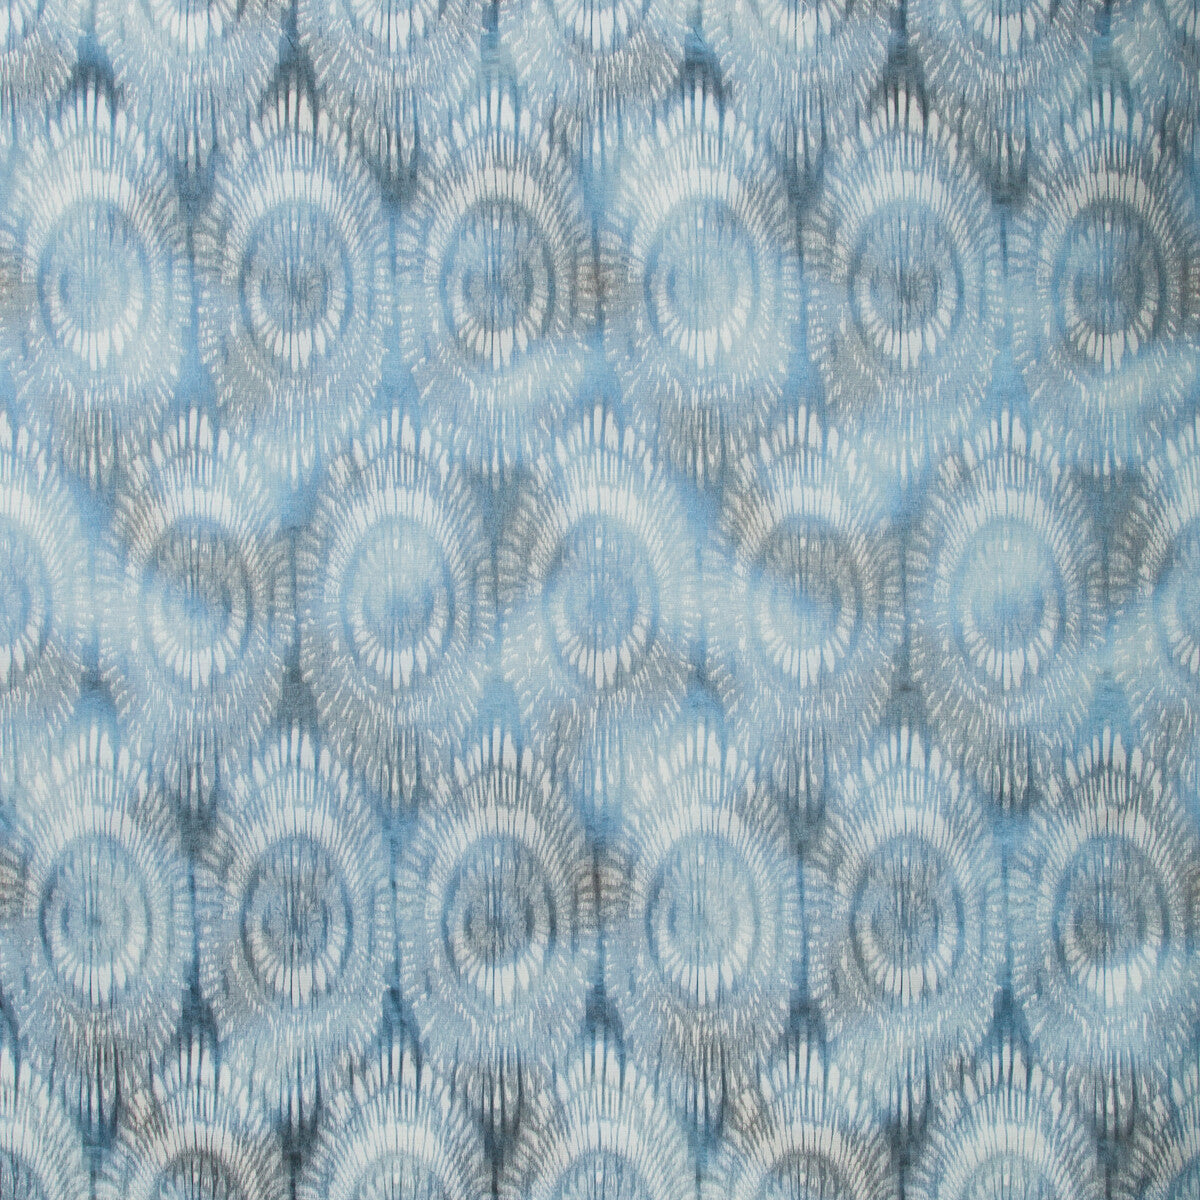 Delta Nile fabric in marine color - pattern DELTA NILE.5.0 - by Kravet Couture in the Modern Colors-Sojourn Collection collection